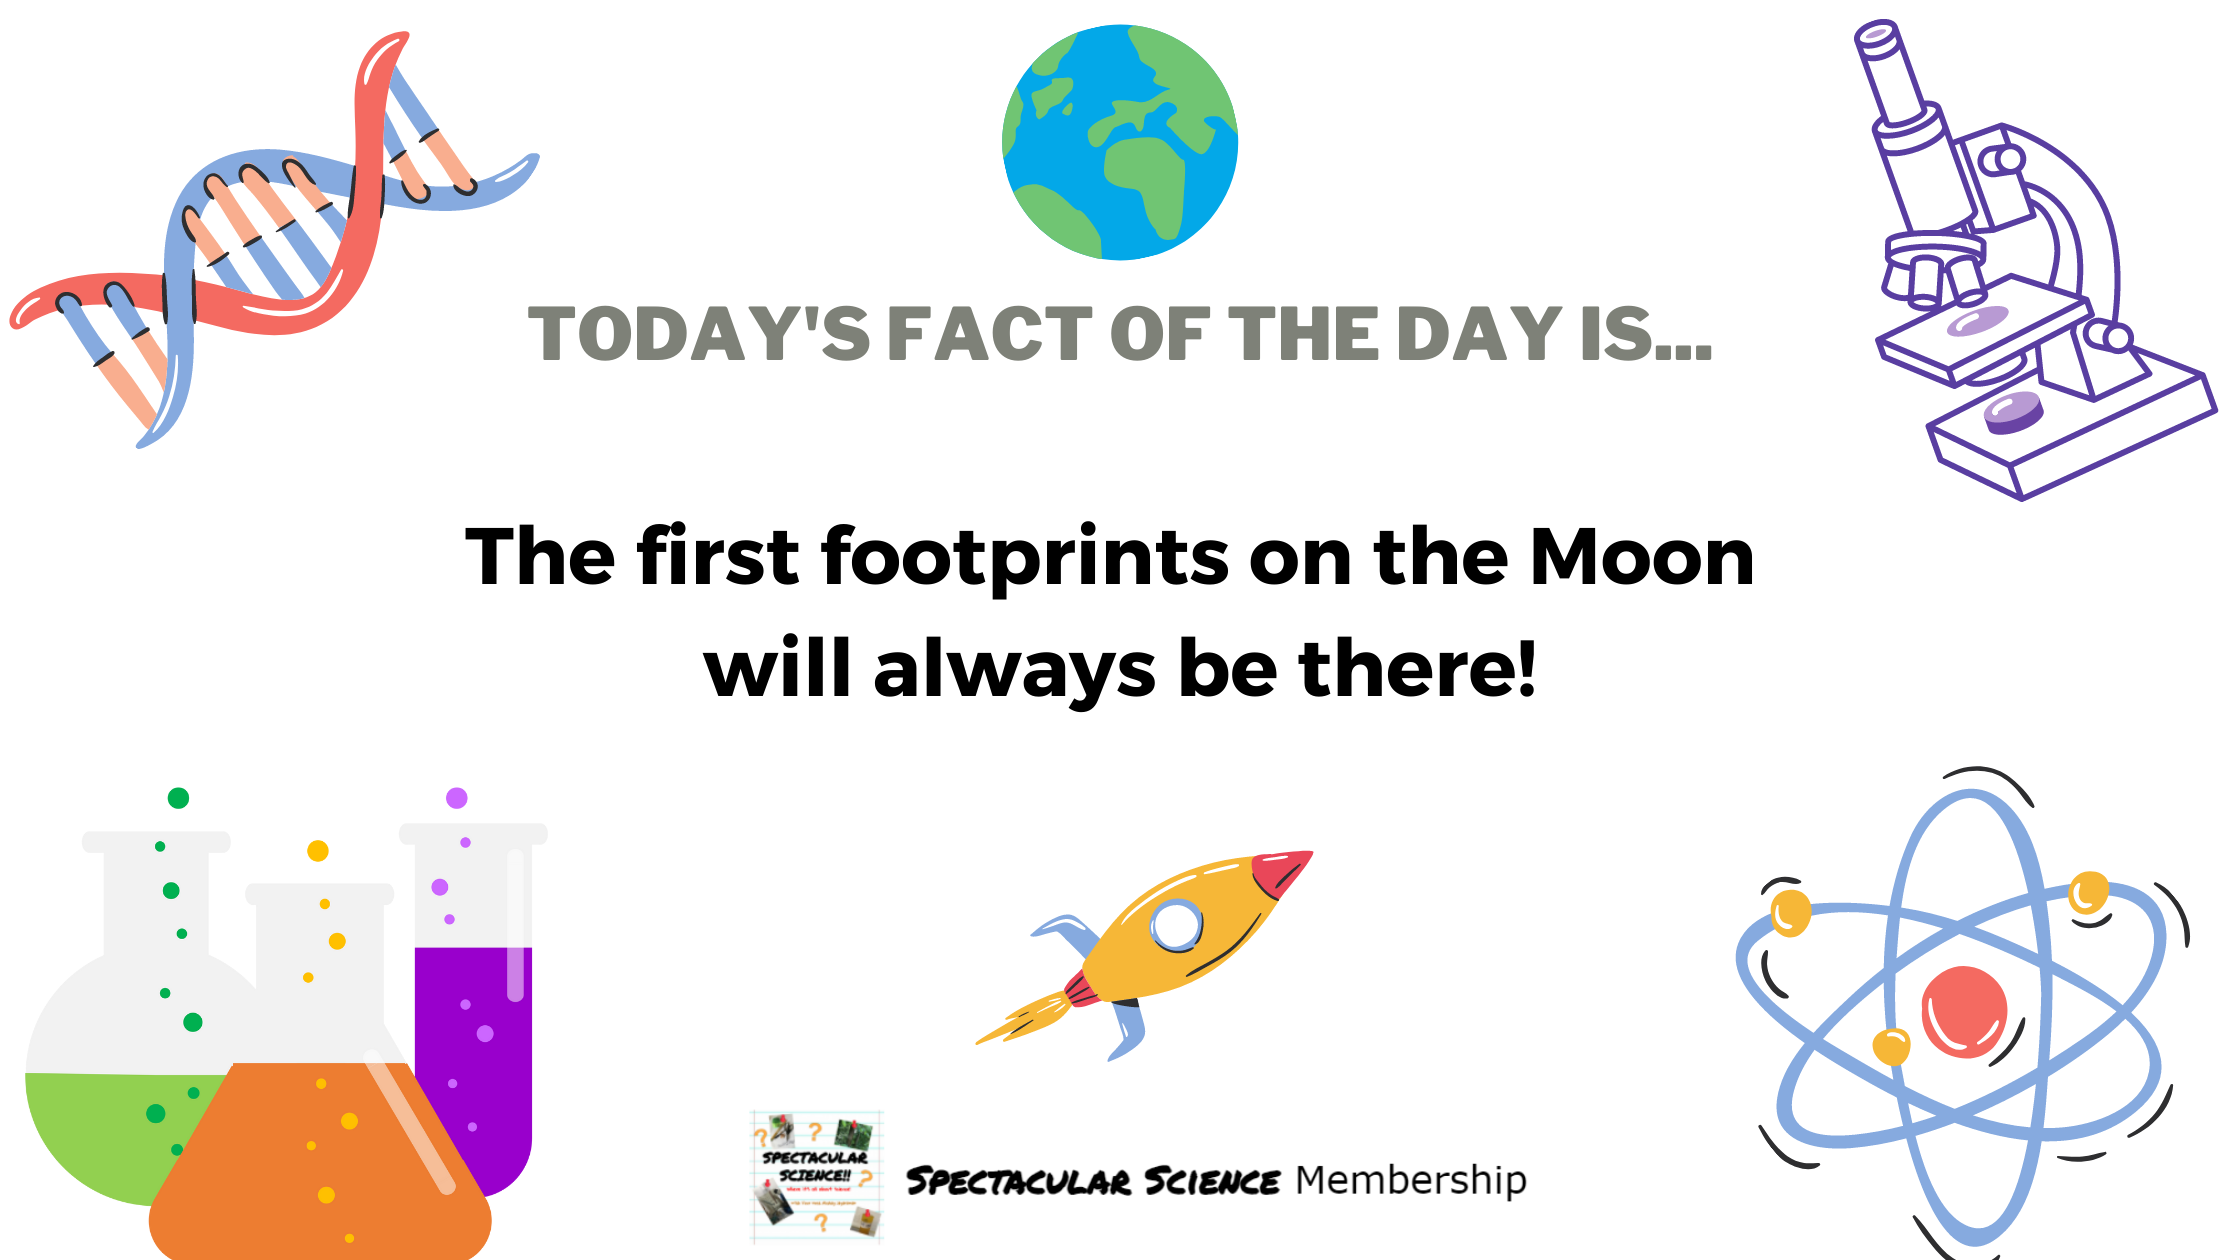 Fact of the Day Image Feb. 16th